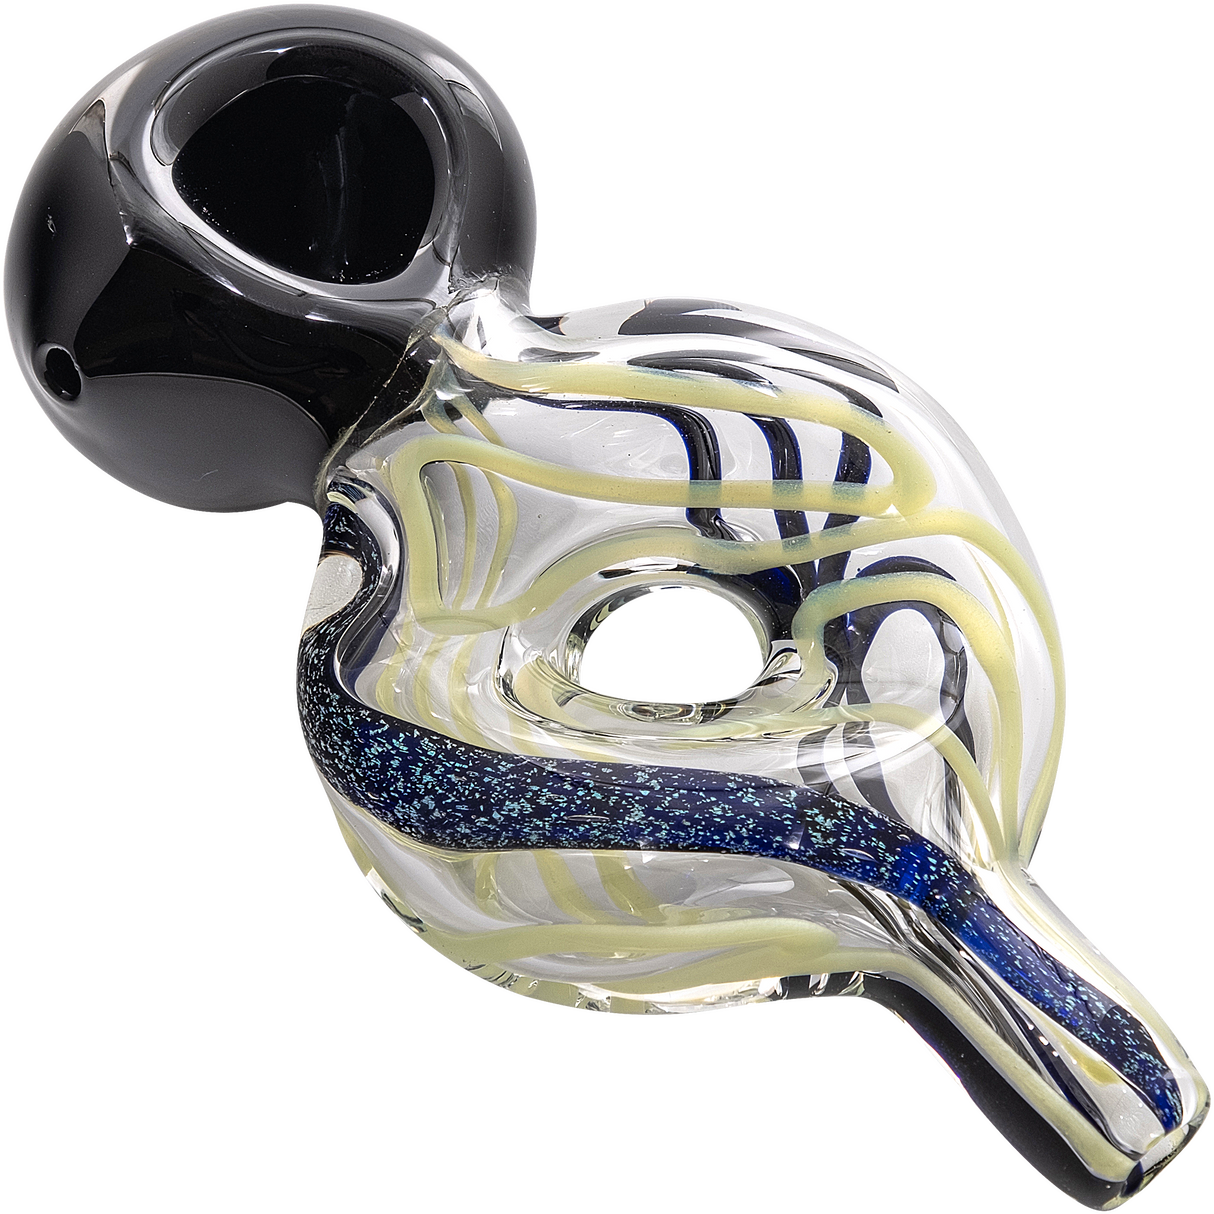 LA Pipes Dichro Donut Slime Hand-Pipe in Green Slyme, 4.5" Borosilicate Glass, USA Made